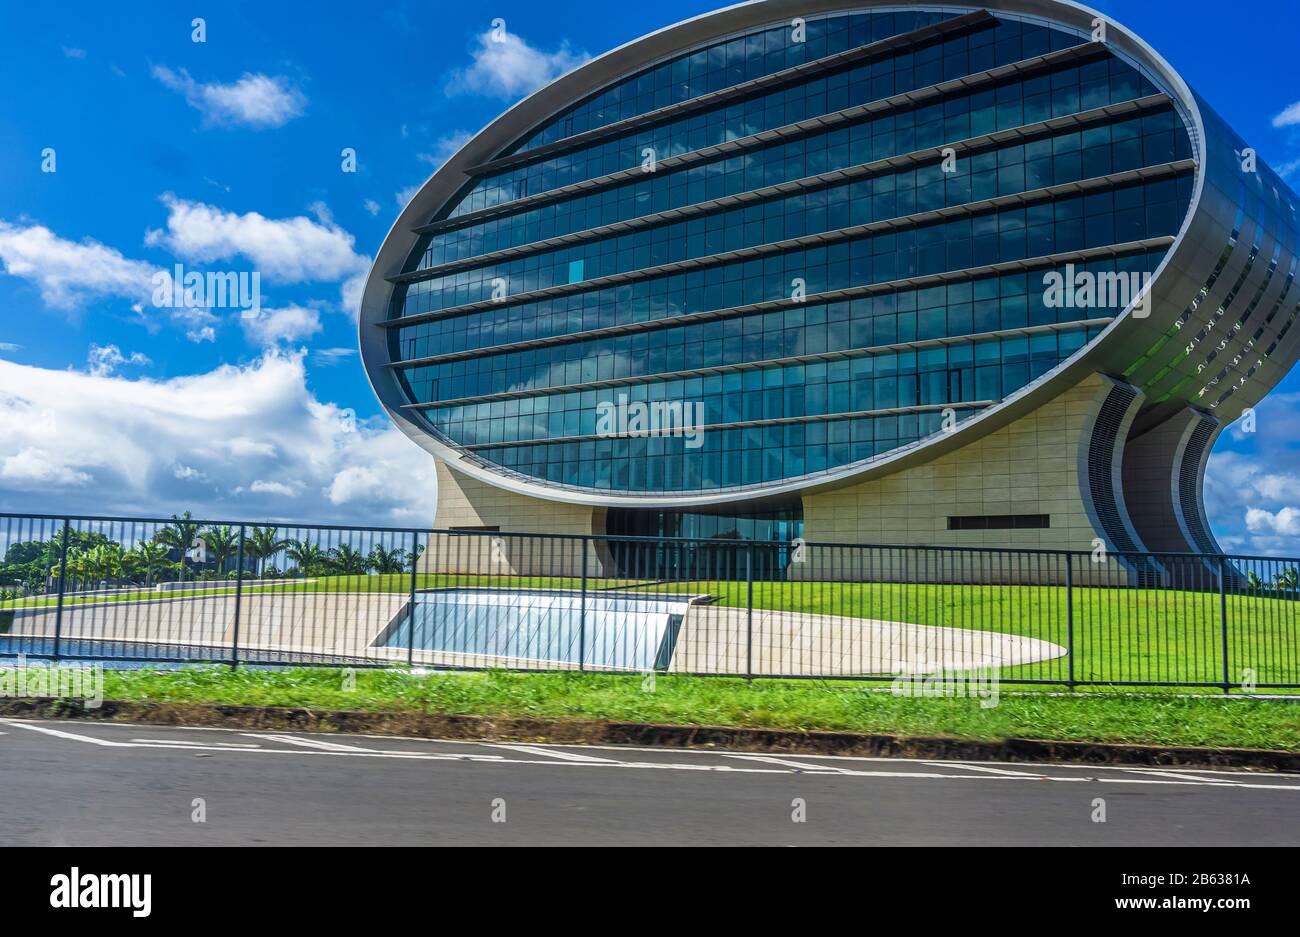 Mauritius, December 2019 - Ellipse shaped building of Mauritius Commercial Bank, one of the oldest banks of the island. Stock Photo